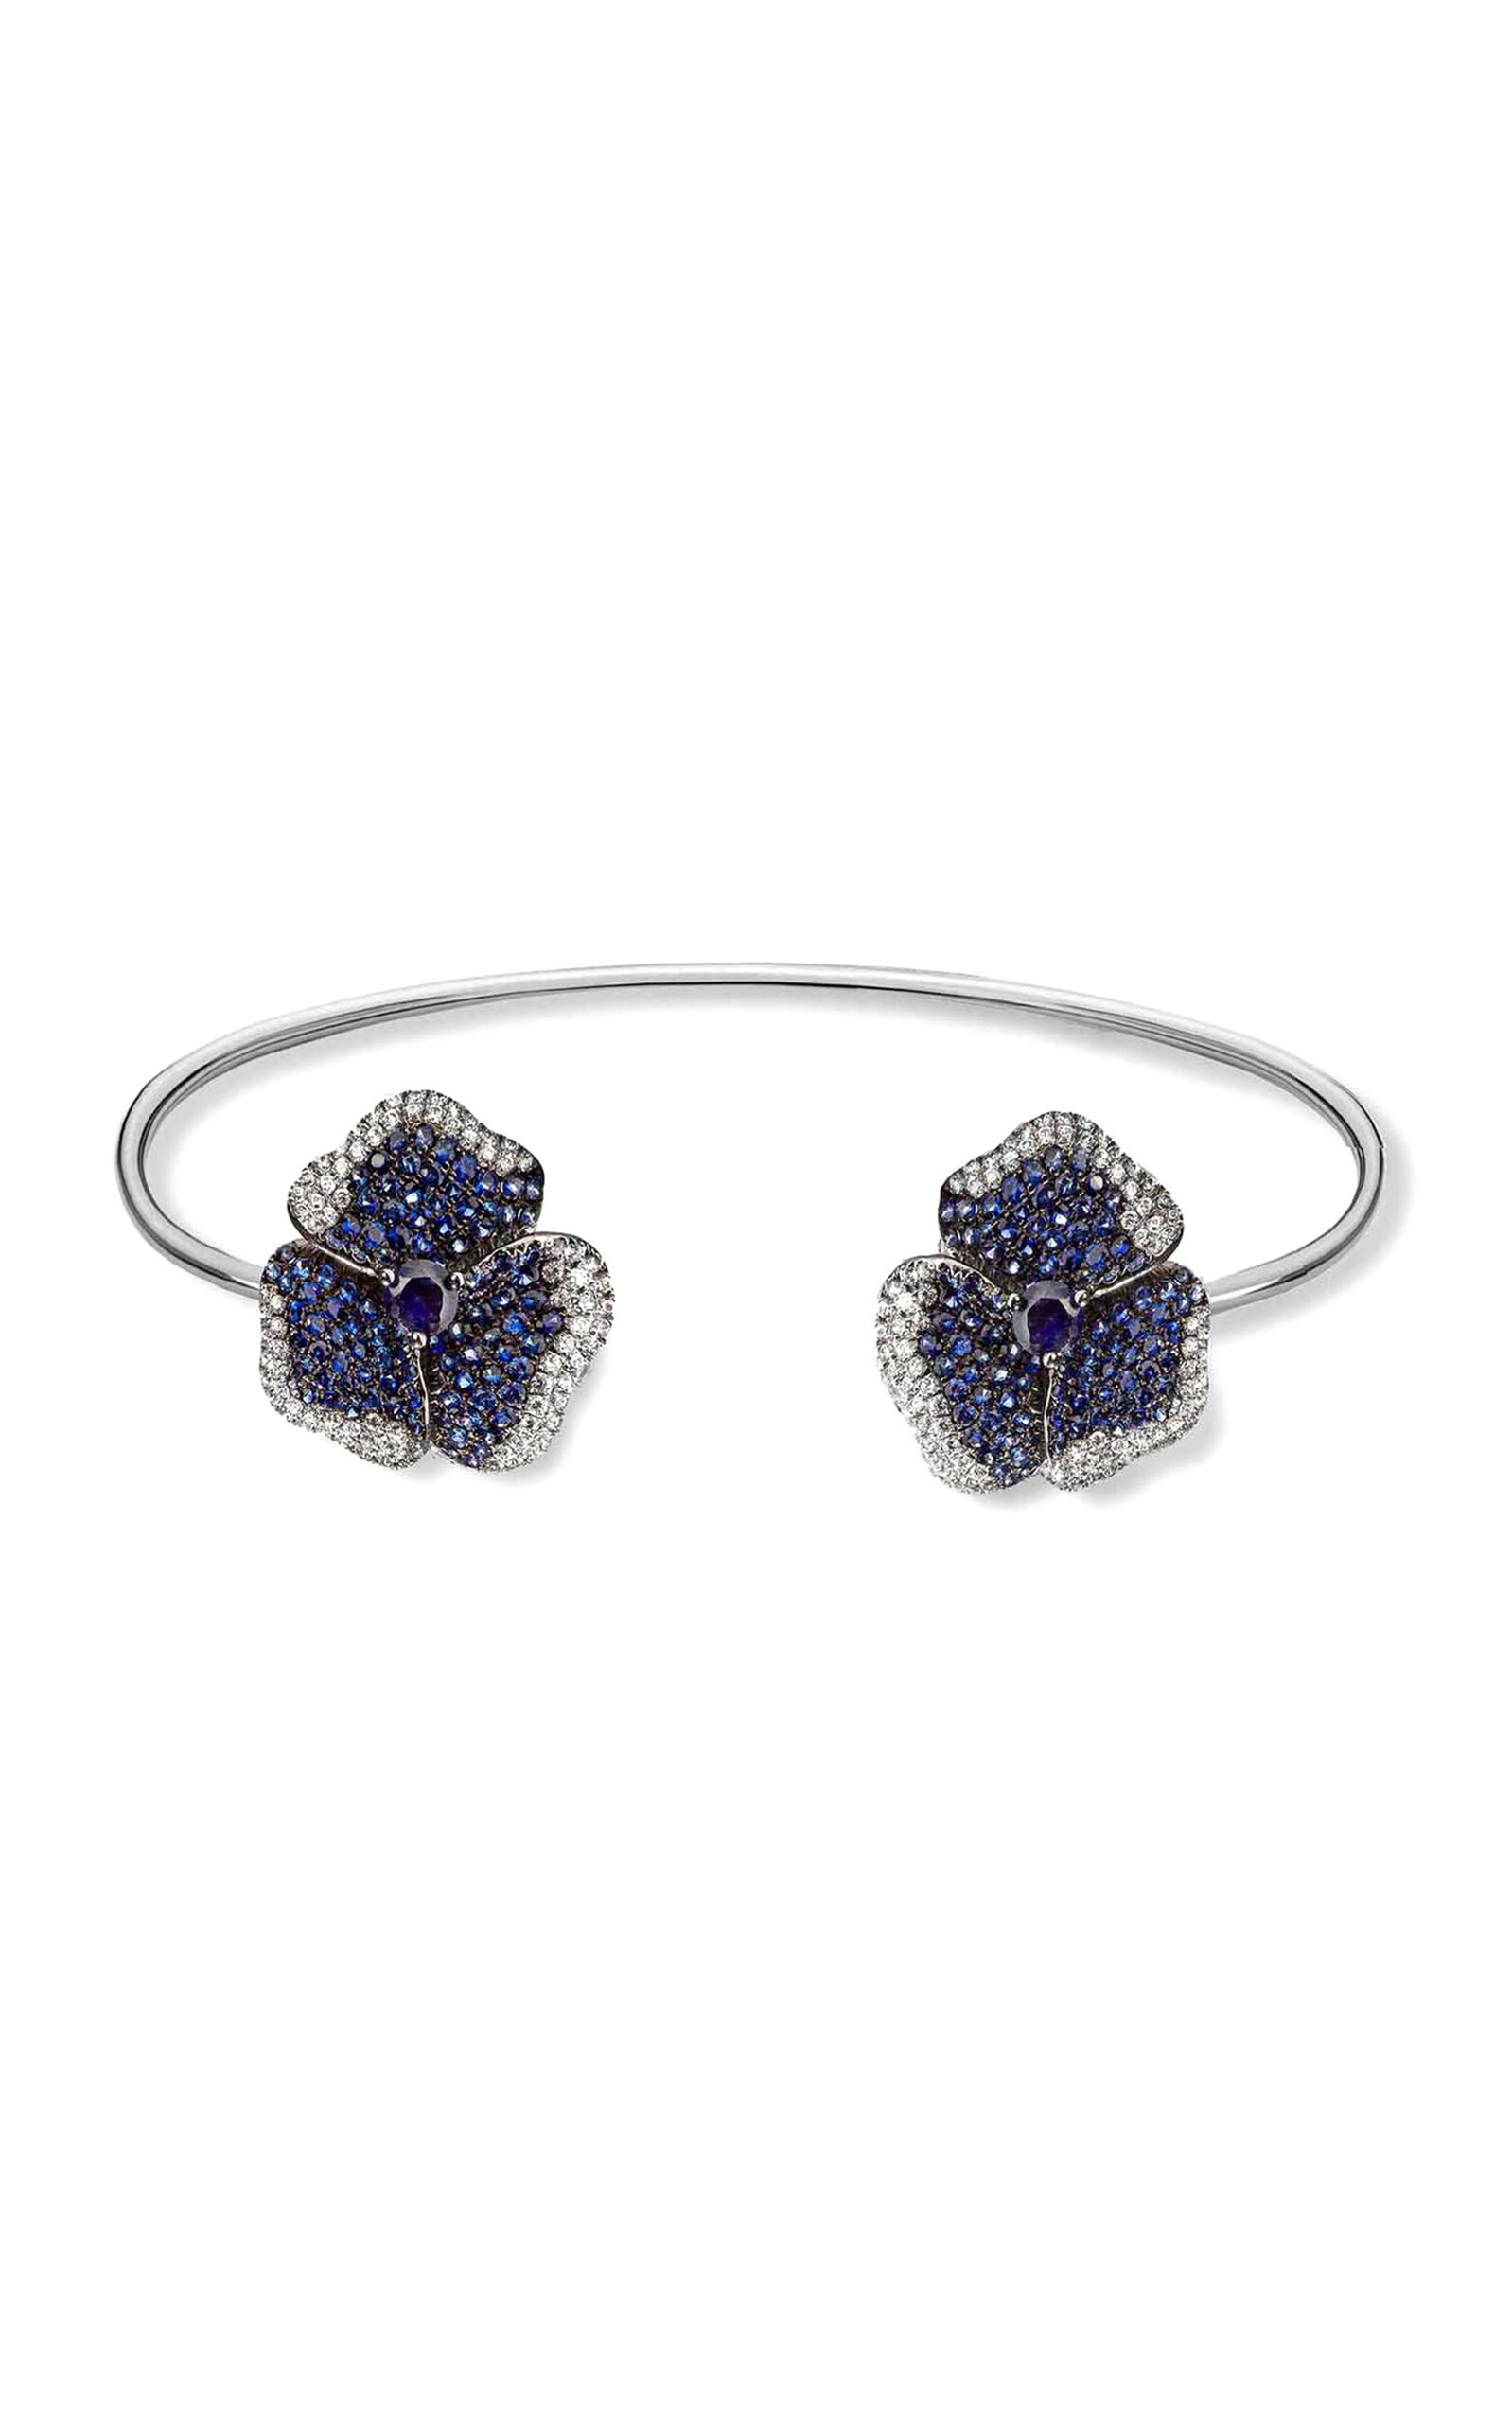 AS29 Women's One of a Kind Bloom 18K White Gold; Diamond; And Sapphire Bangle